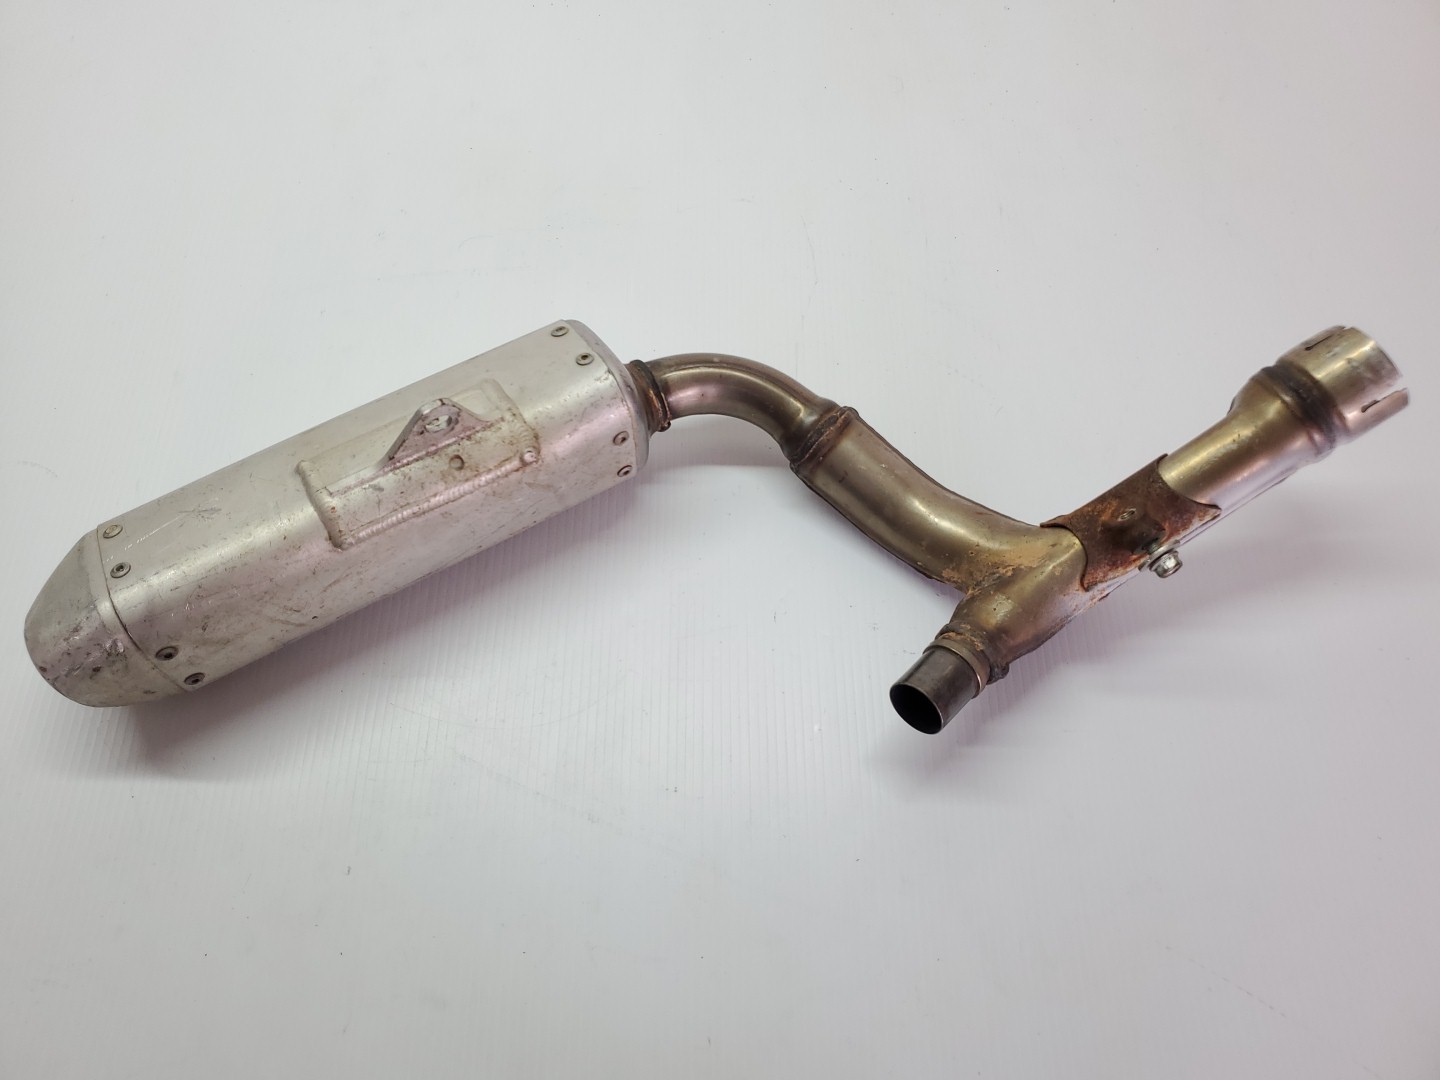 Unknown Year Incomplete Exhaust Muffler Silencer Honda CRF250R